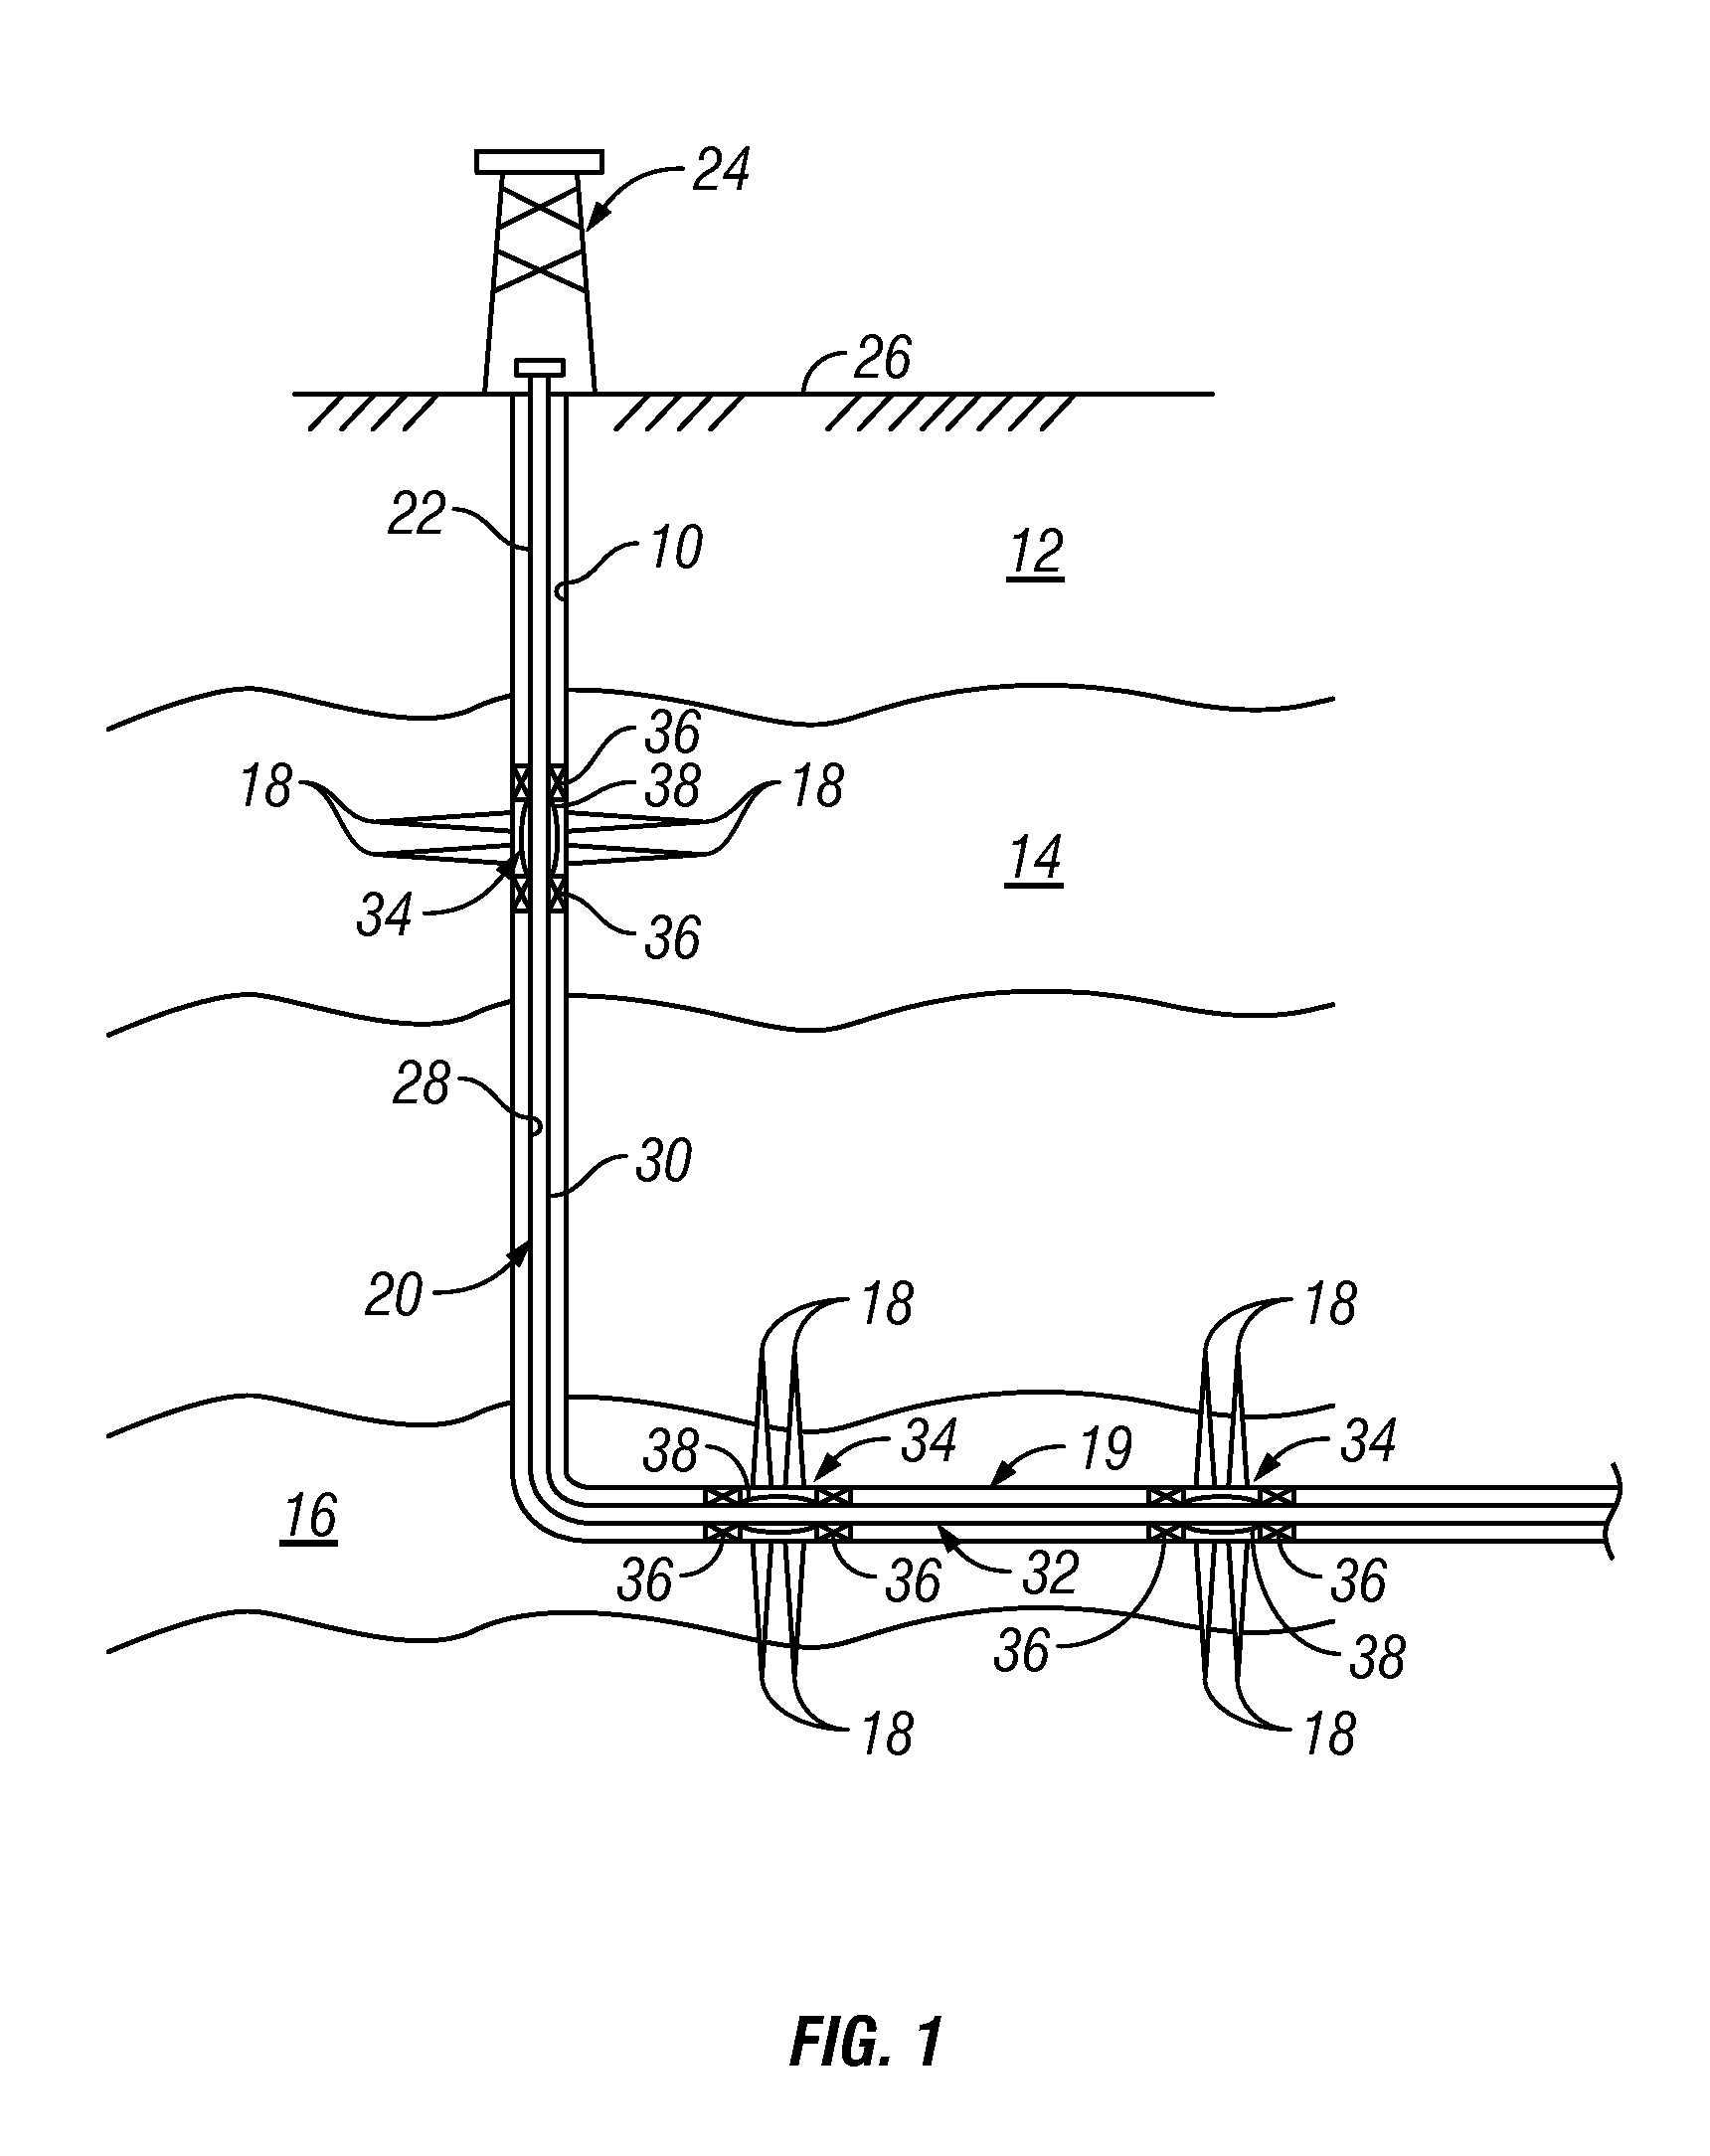 Apparatus and Method for Controlling Water In-Flow Into Wellbores